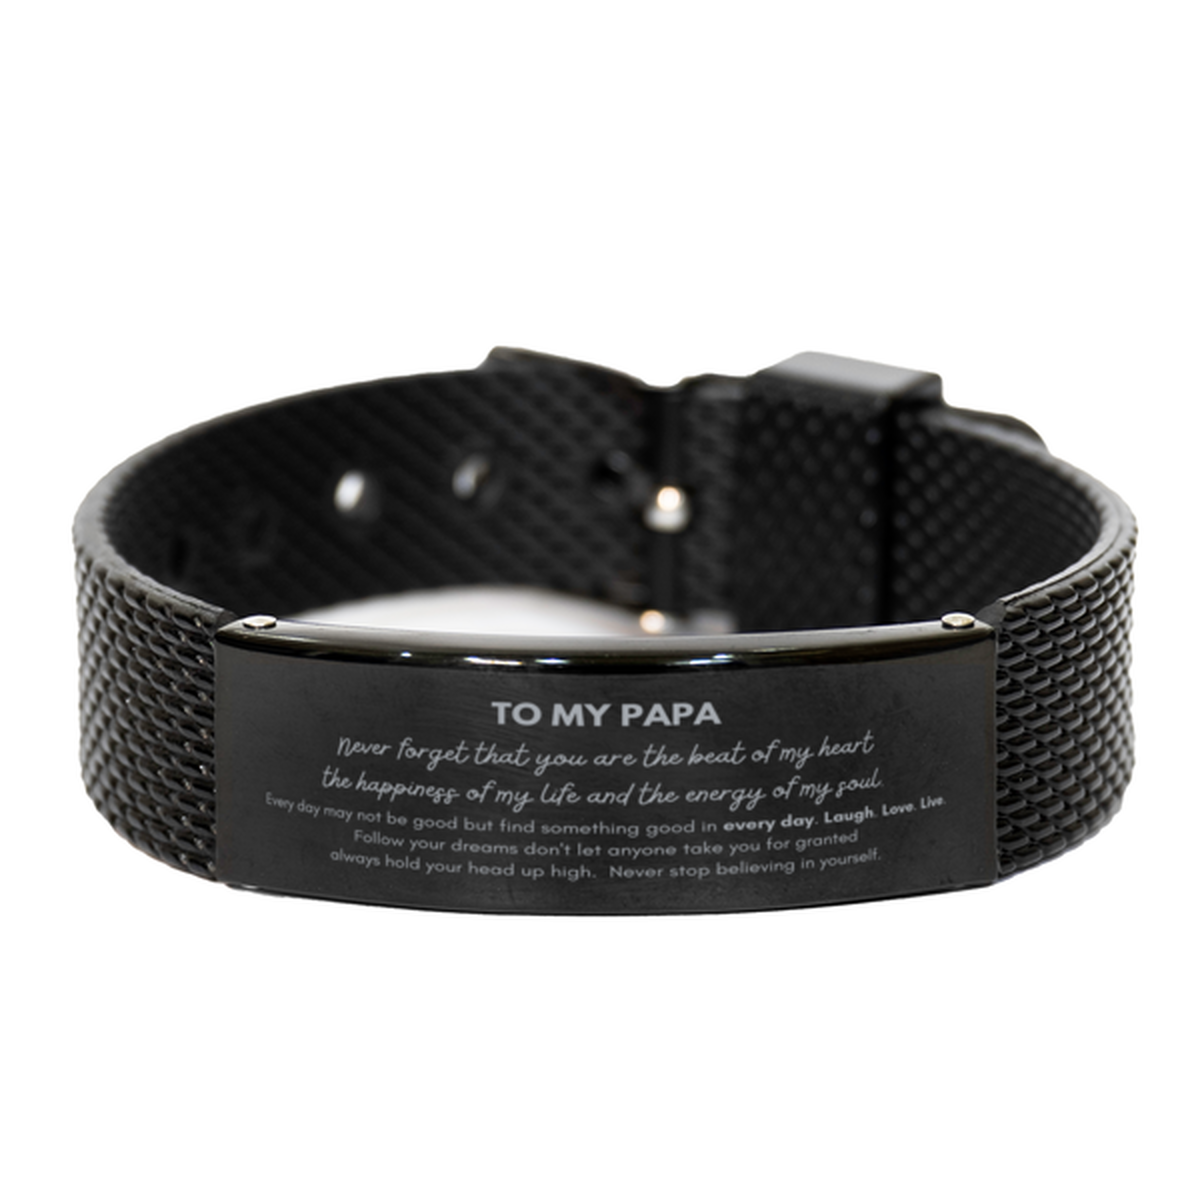 To My Papa Bracelet Gifts, Christmas Papa Black Shark Mesh Bracelet Present, Birthday Unique Motivational For Papa, To My Papa Never forget that you are the beat of my heart the happiness of my life and the energy of my soul